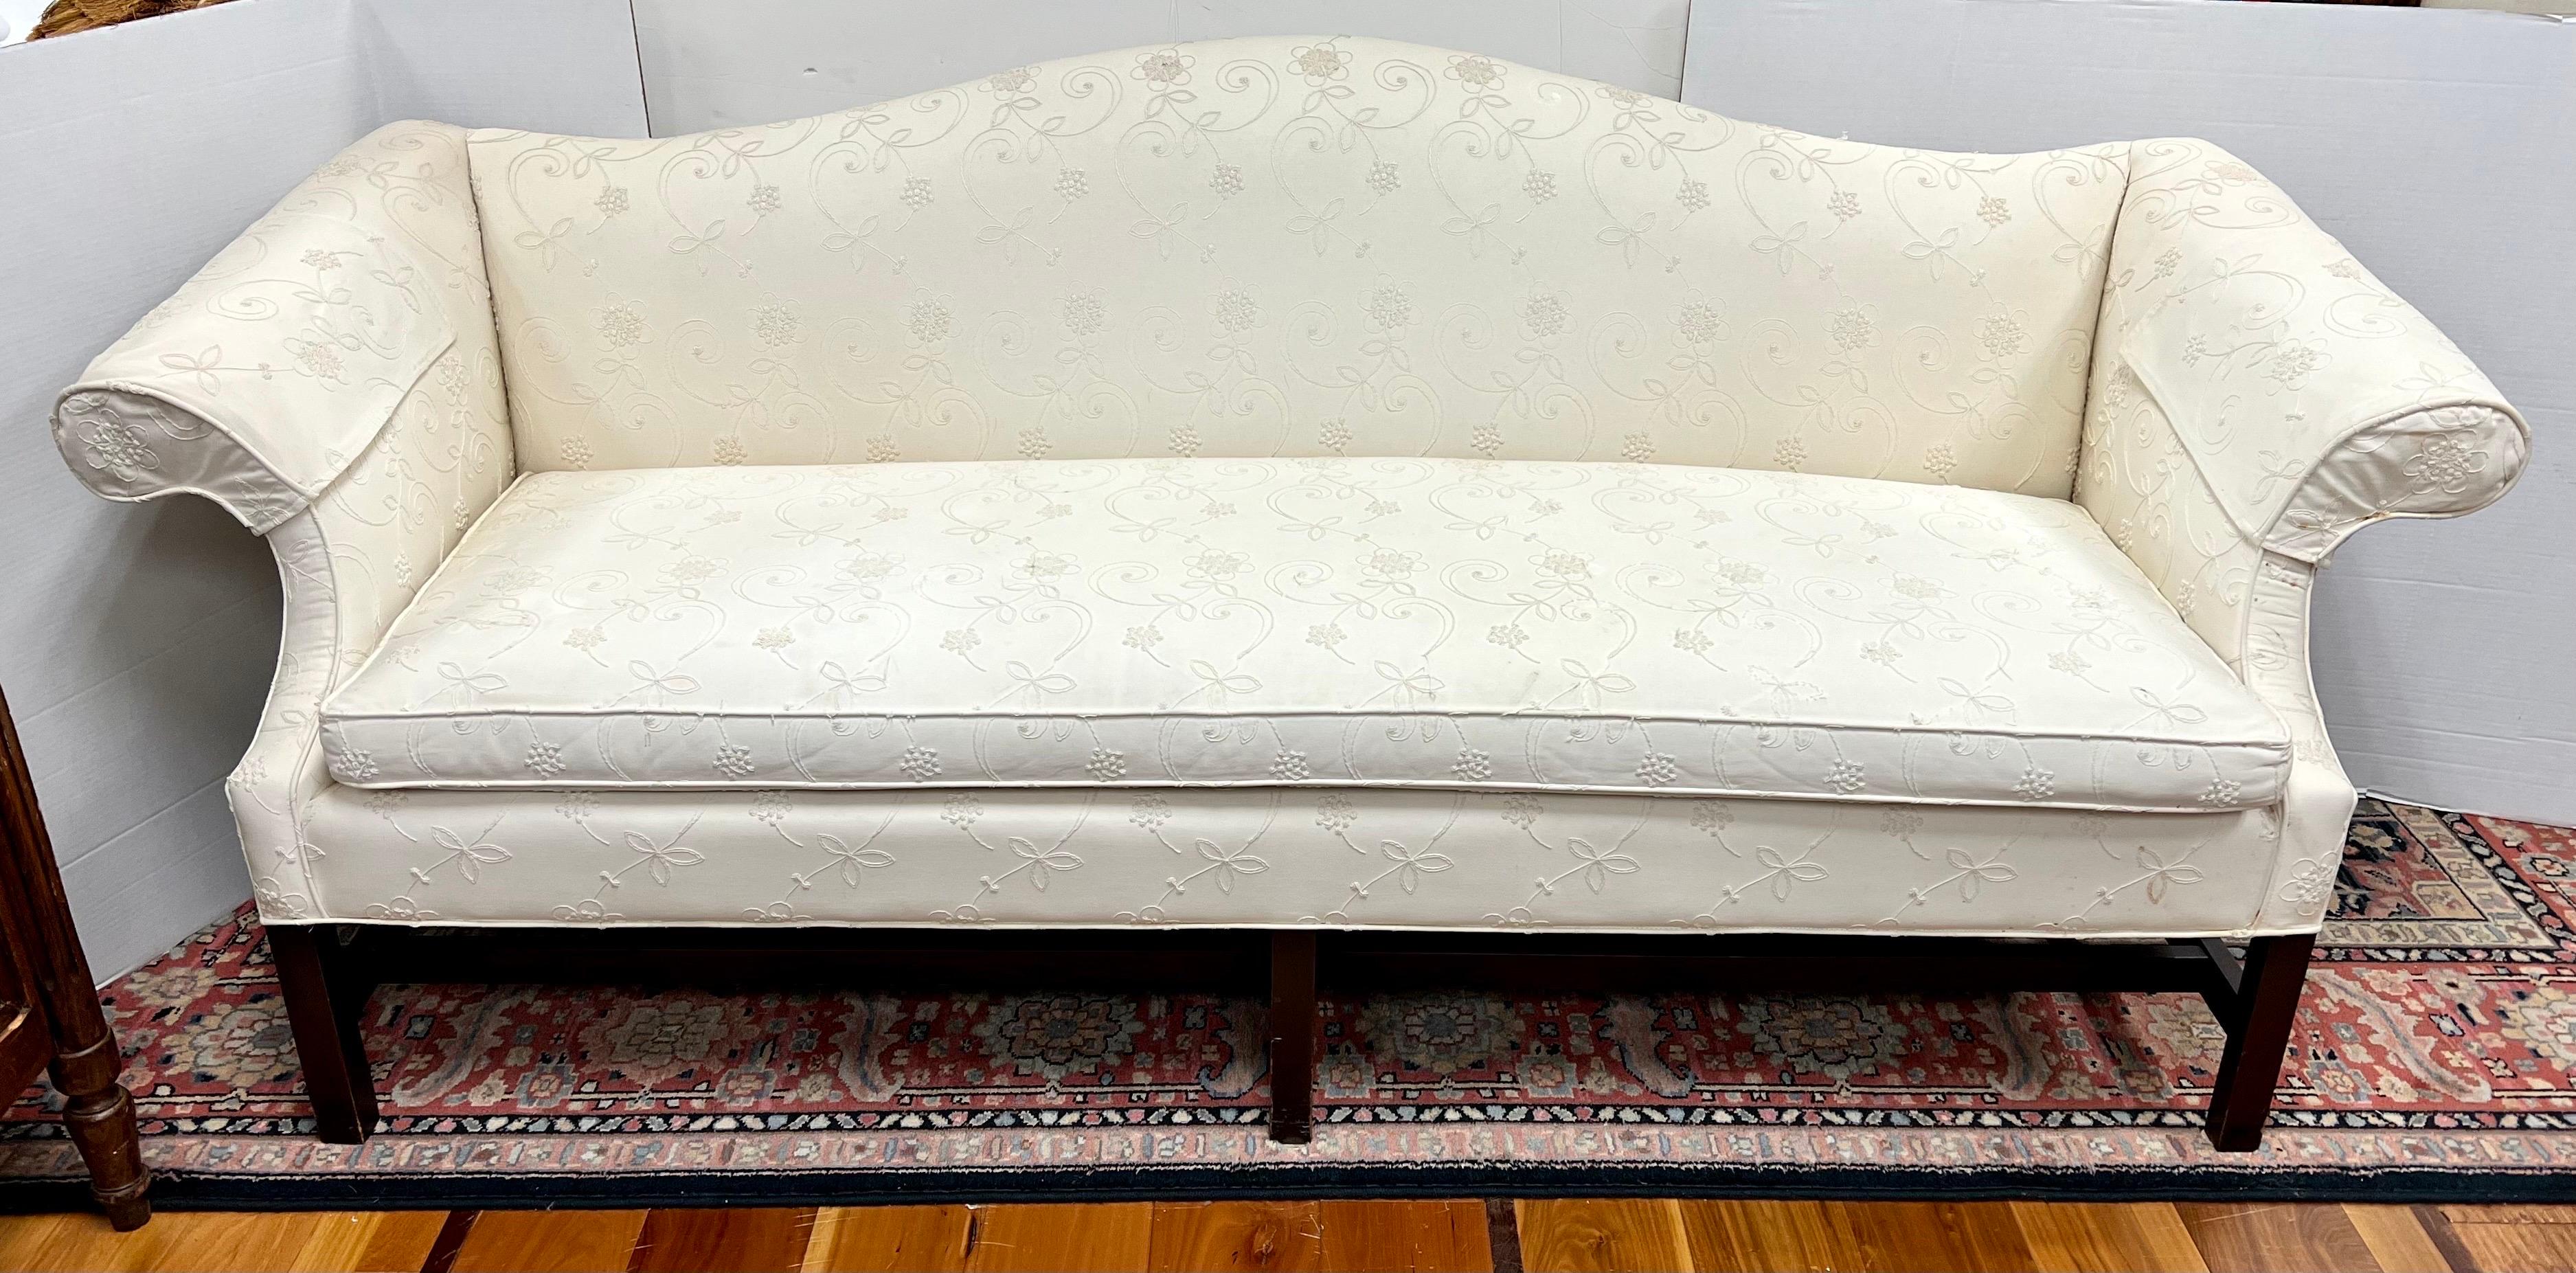 An elegant sofa with Classic and coveted camelback Silhouette and exposed mahogany wood legs and stretcher. Features a stunning off white raised crewelwork fabric and single seat cushion that can fit up to four people. It sits very comfortably. Why